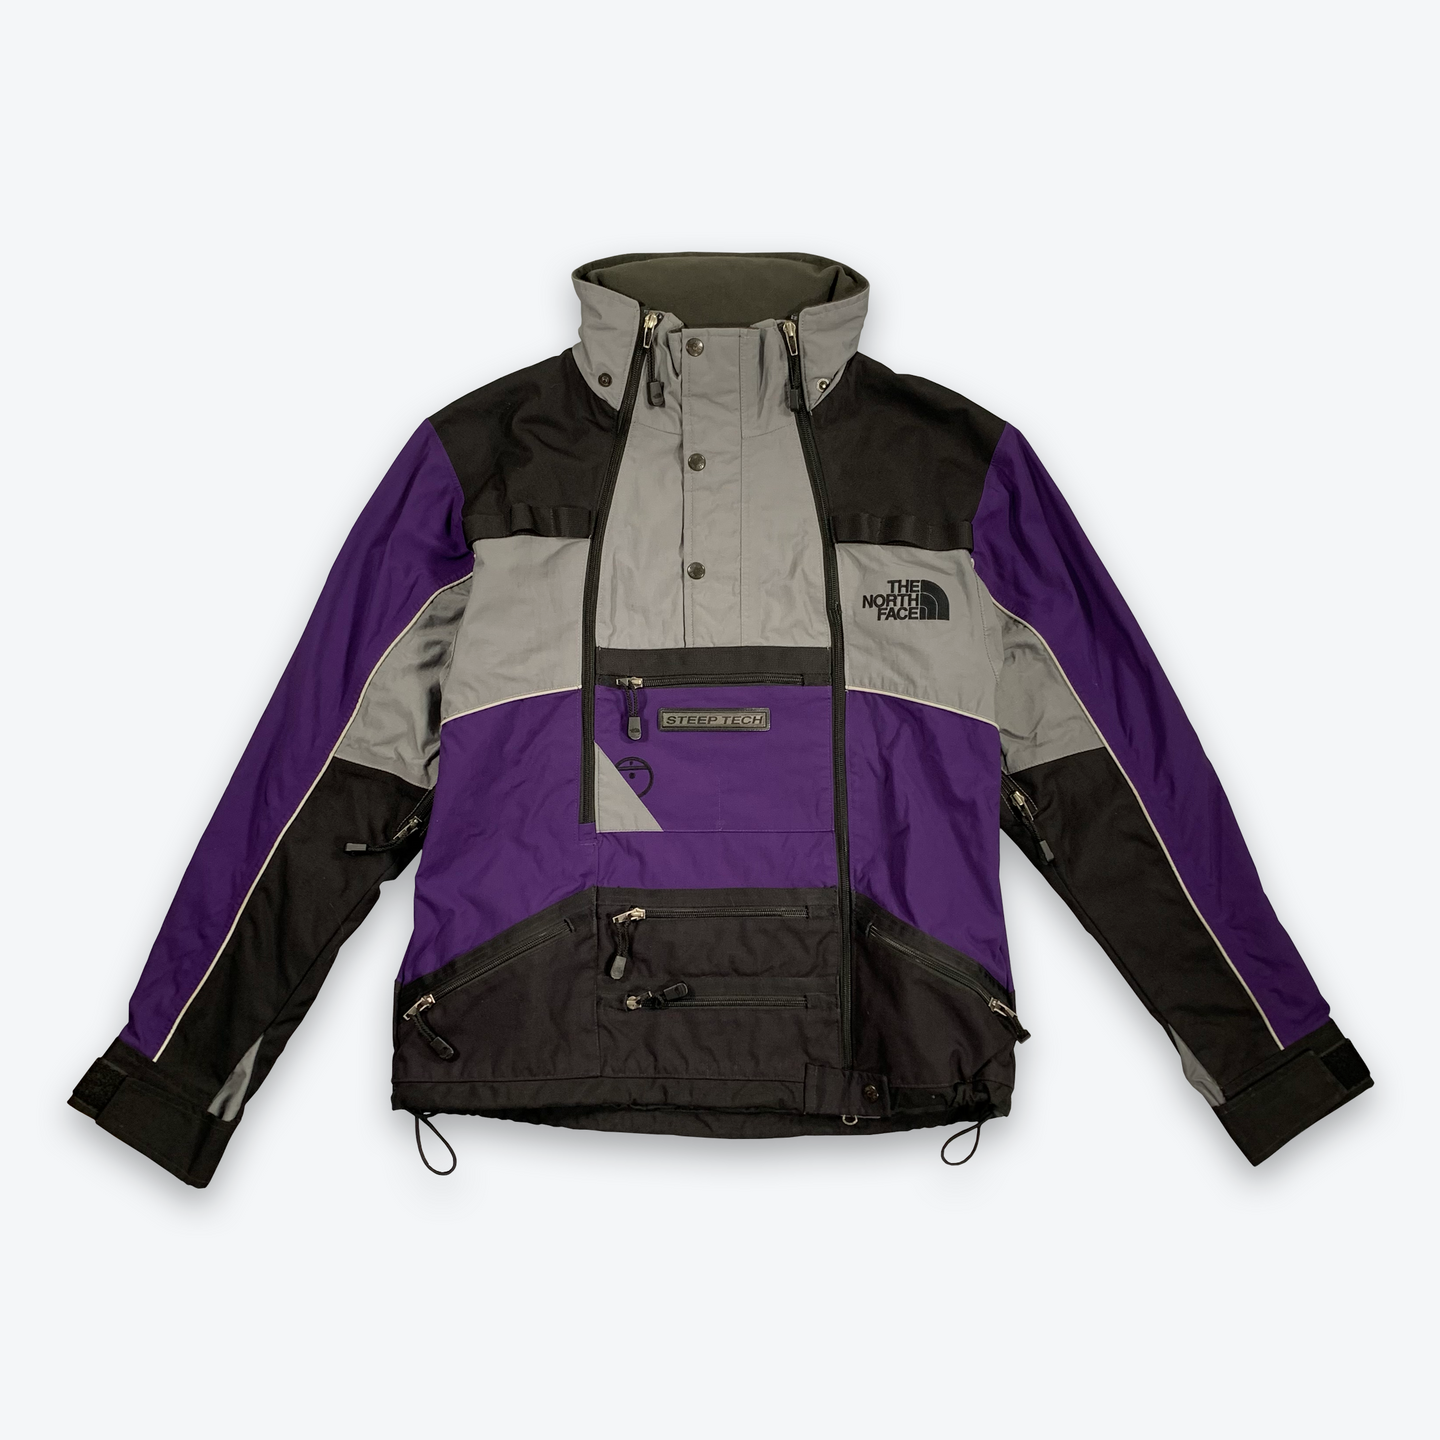 The North Face Steep-Tech Jacket (Multi) – 194 Local